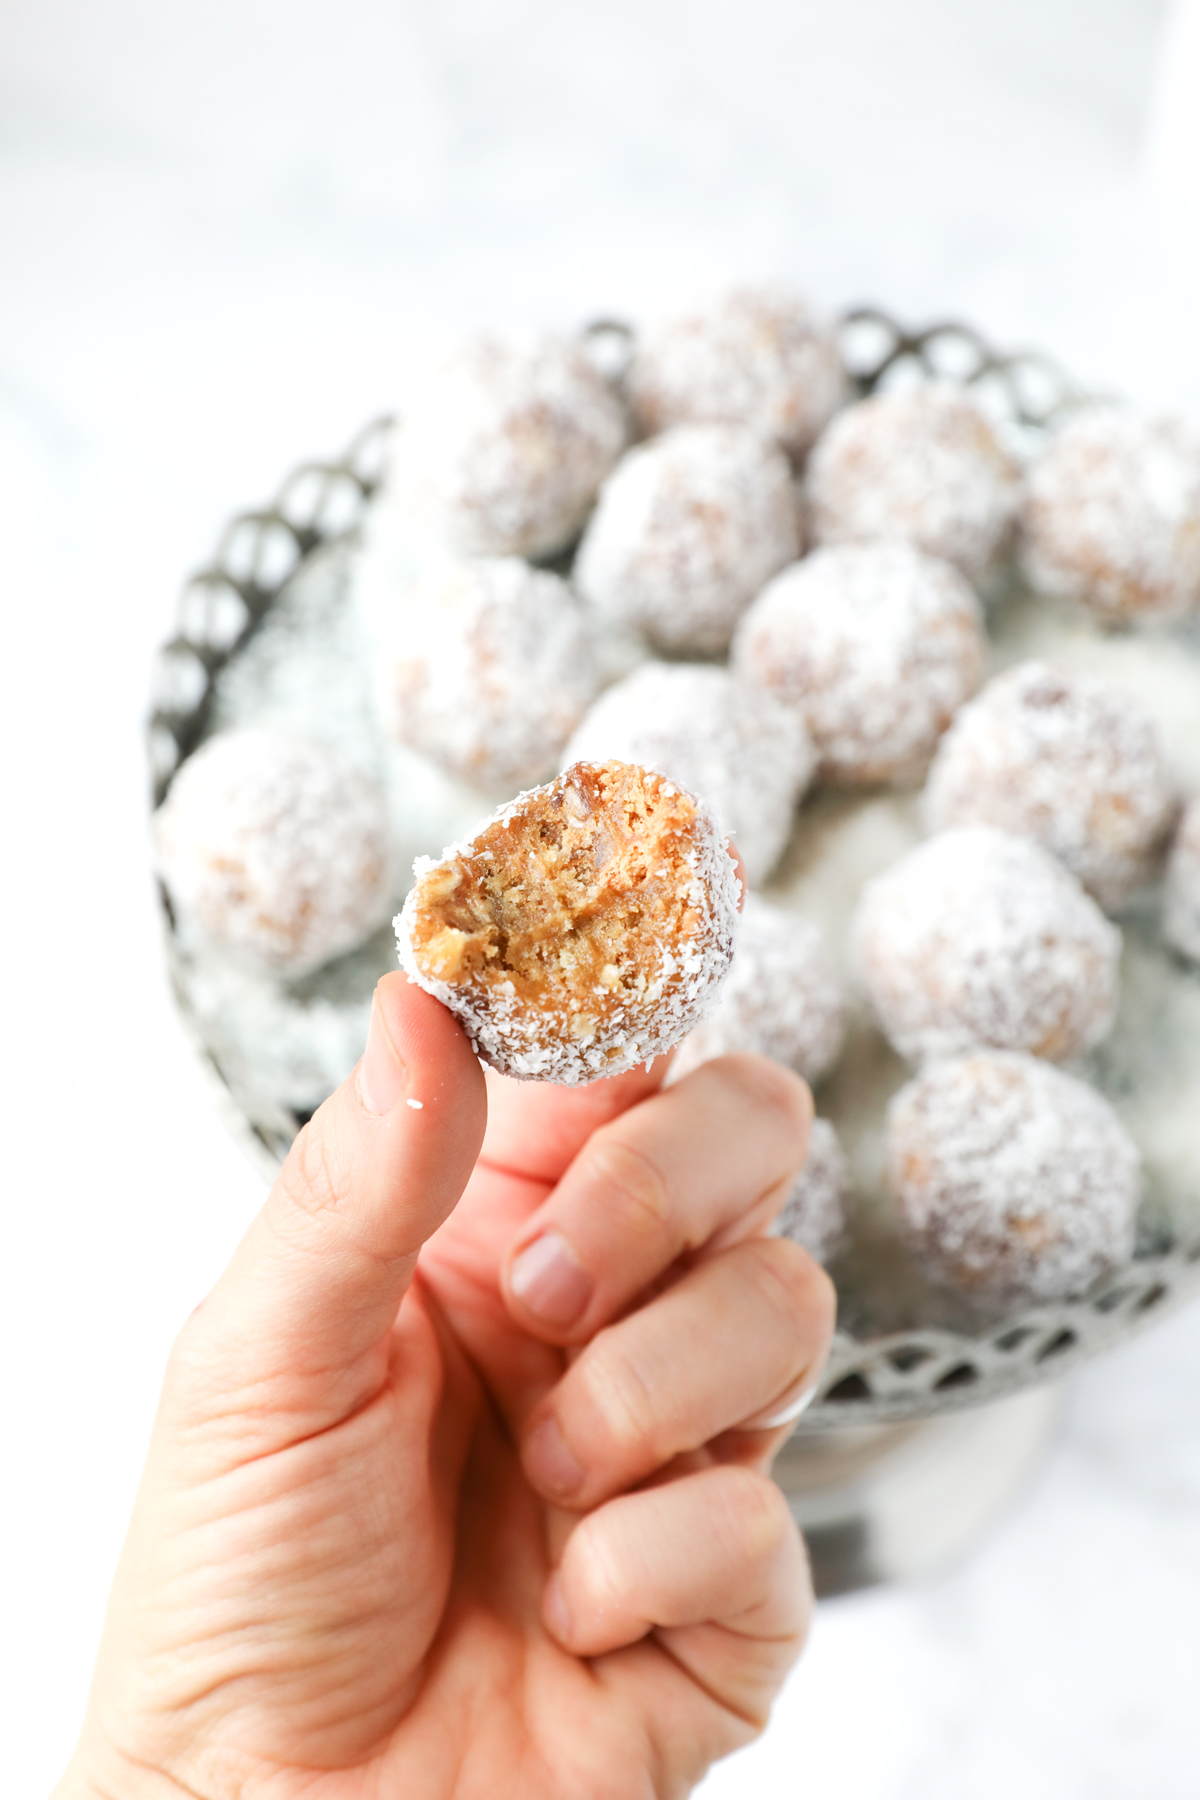 date balls rolled in coconut